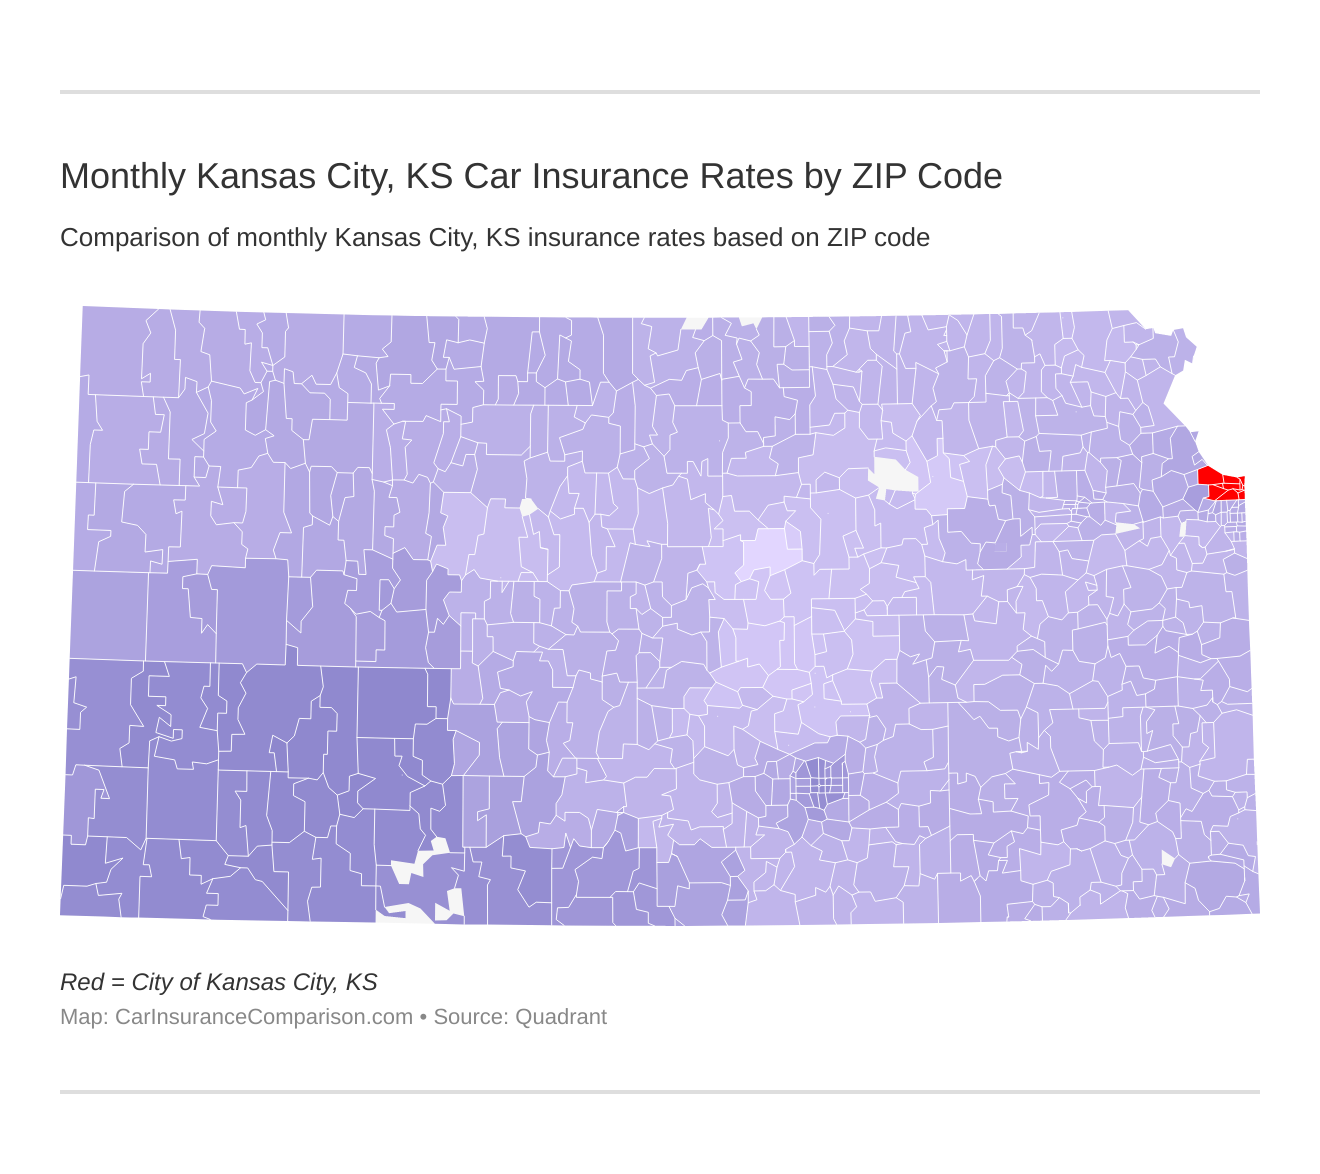 Monthly Kansas City, KS Car Insurance Rates by ZIP Code